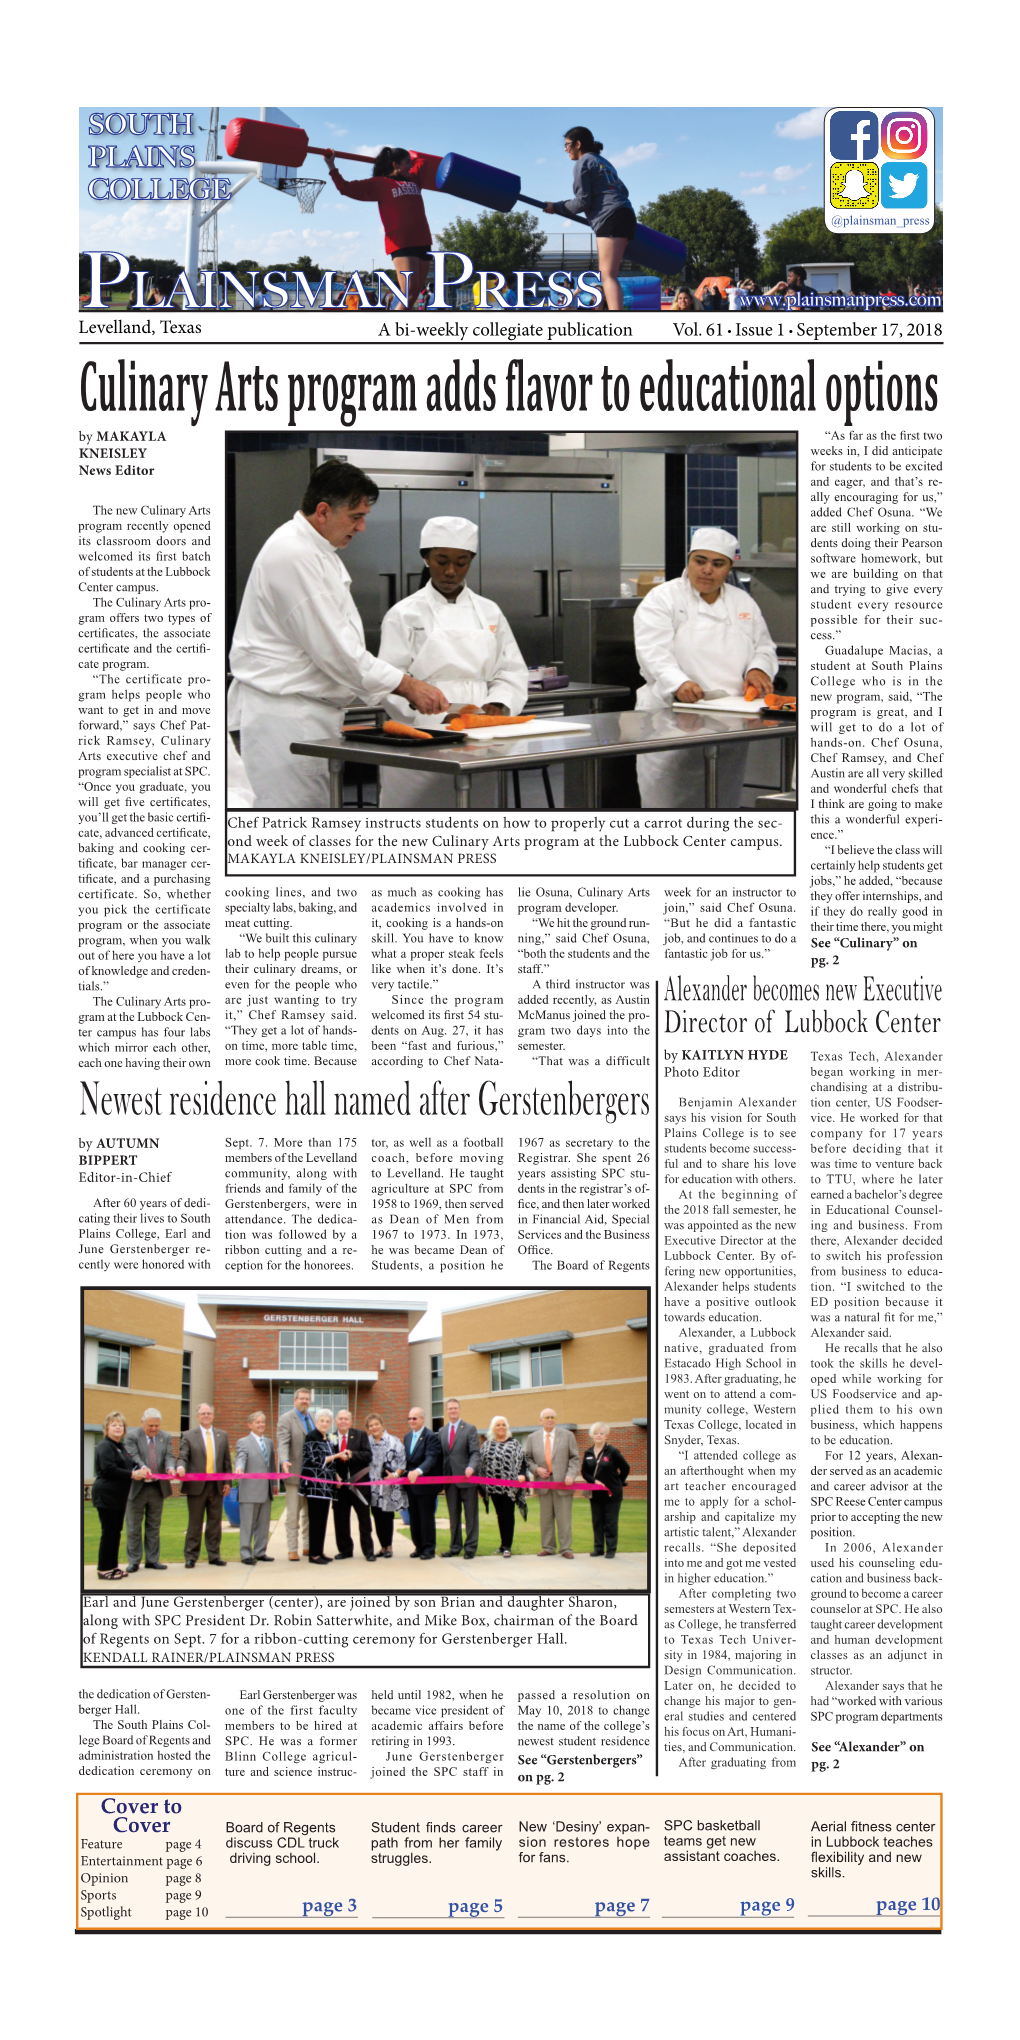 Culinary Arts Program Adds Flavor to Educational Options